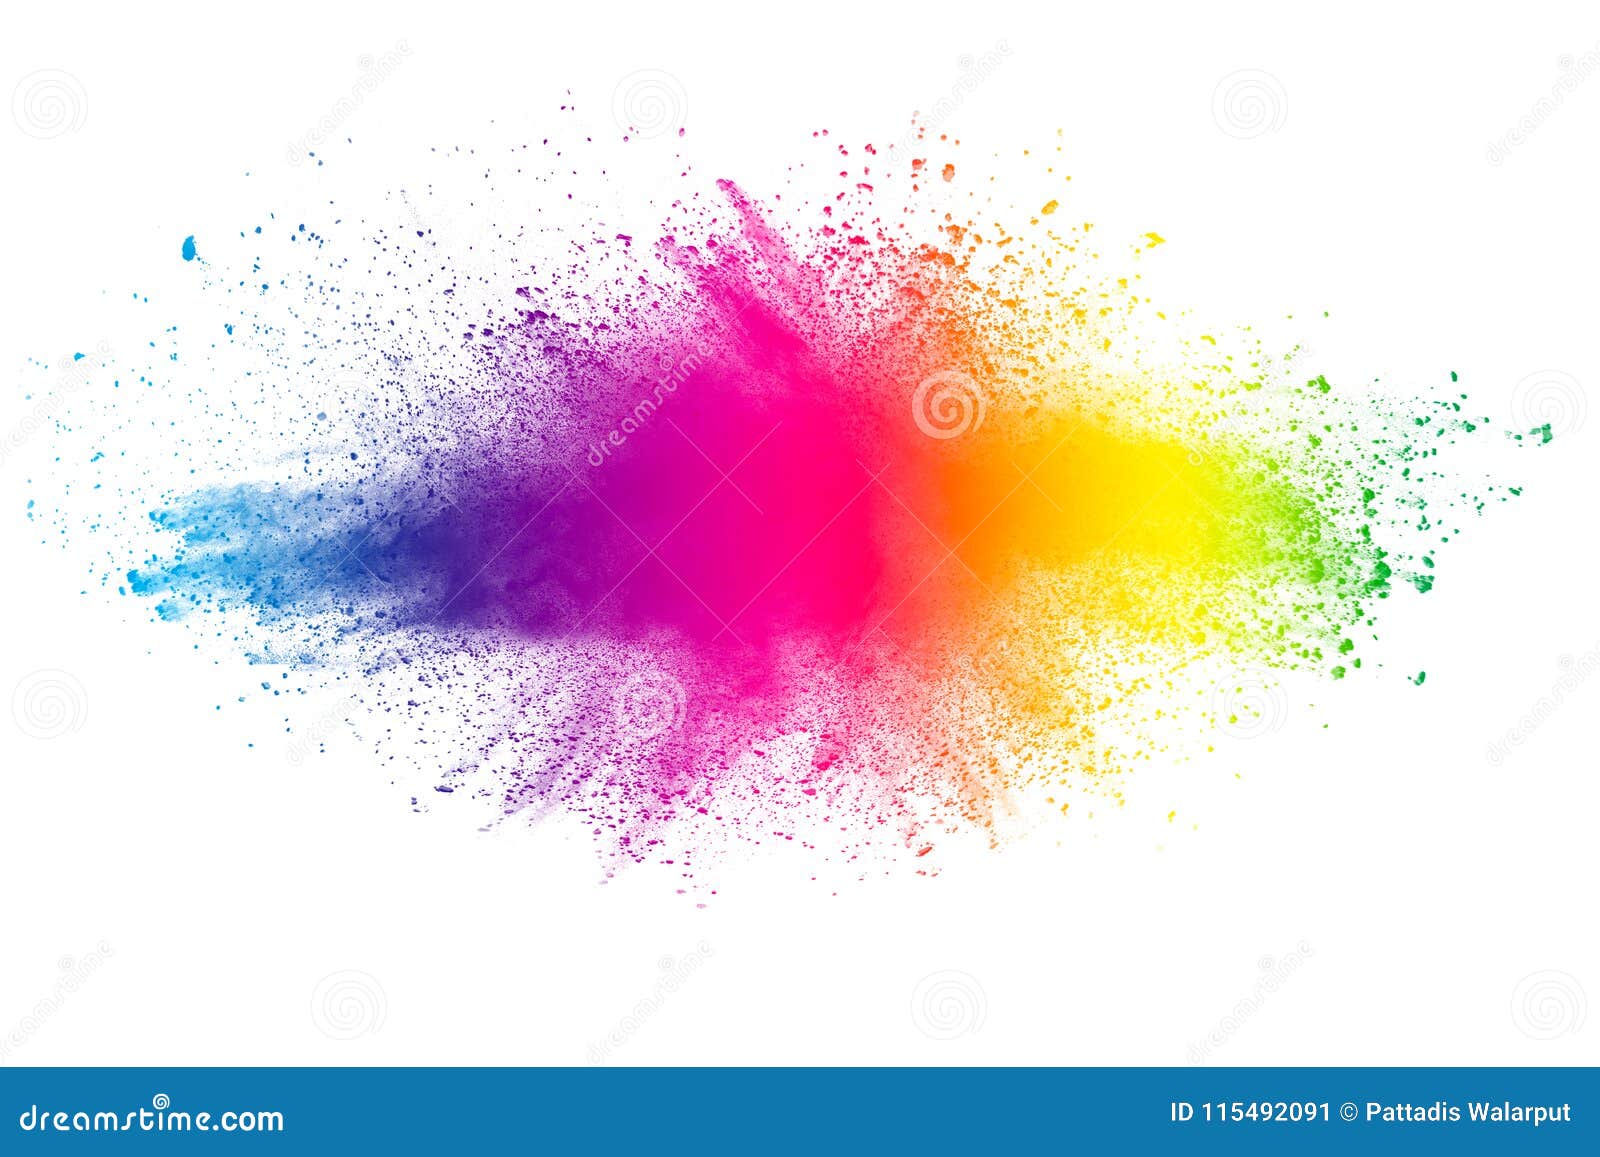 abstract multi color powder explosion on white background.